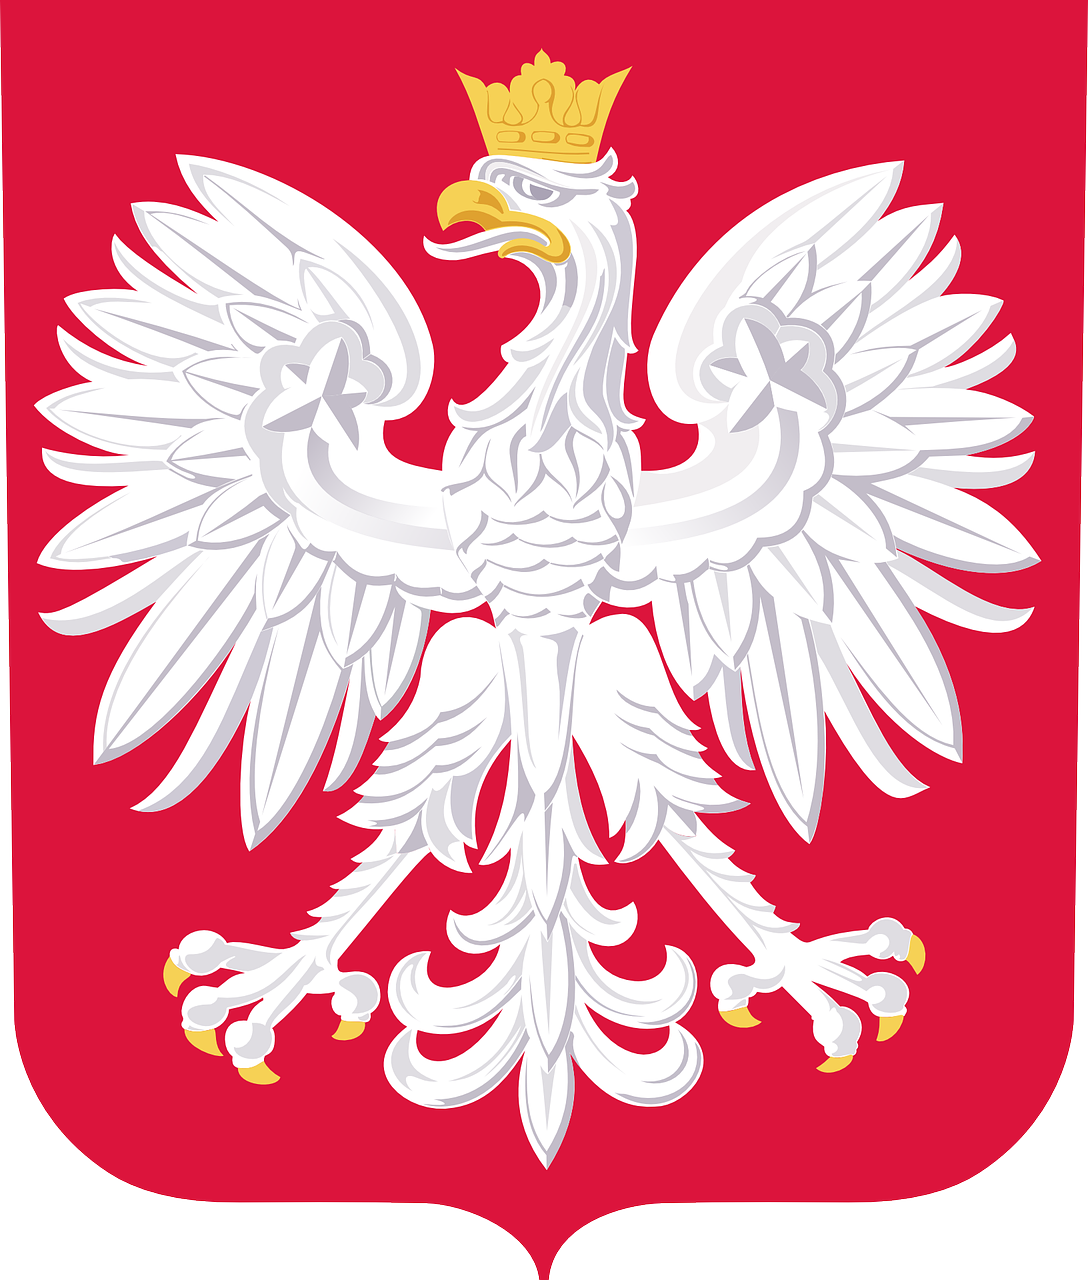 coat of arms, national coat of arms, poland-67863.jpg